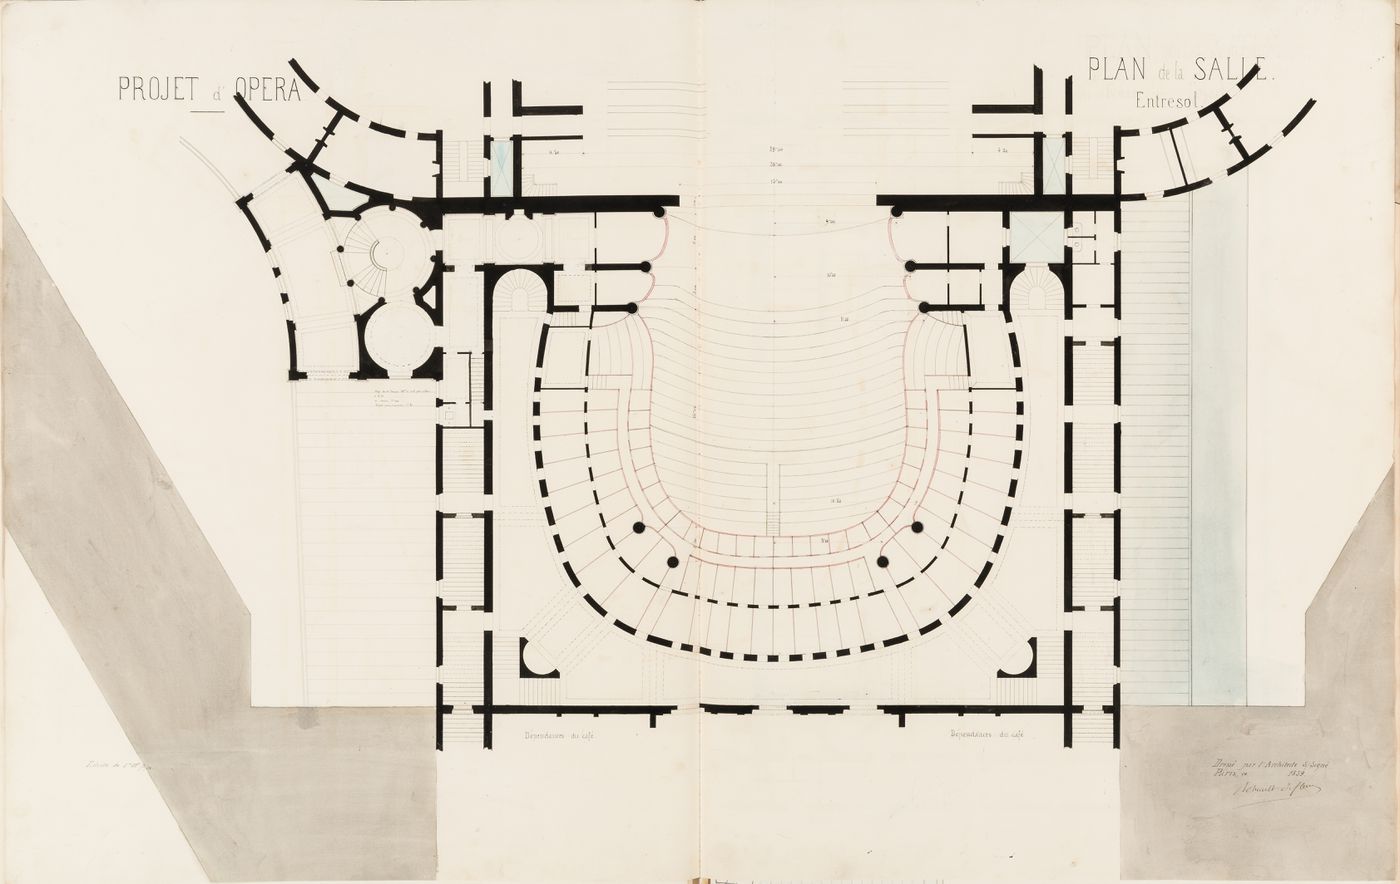 Project for an opera house for the Théâtre impérial de l'opéra: Plan for the auditorium at the "entresol" level